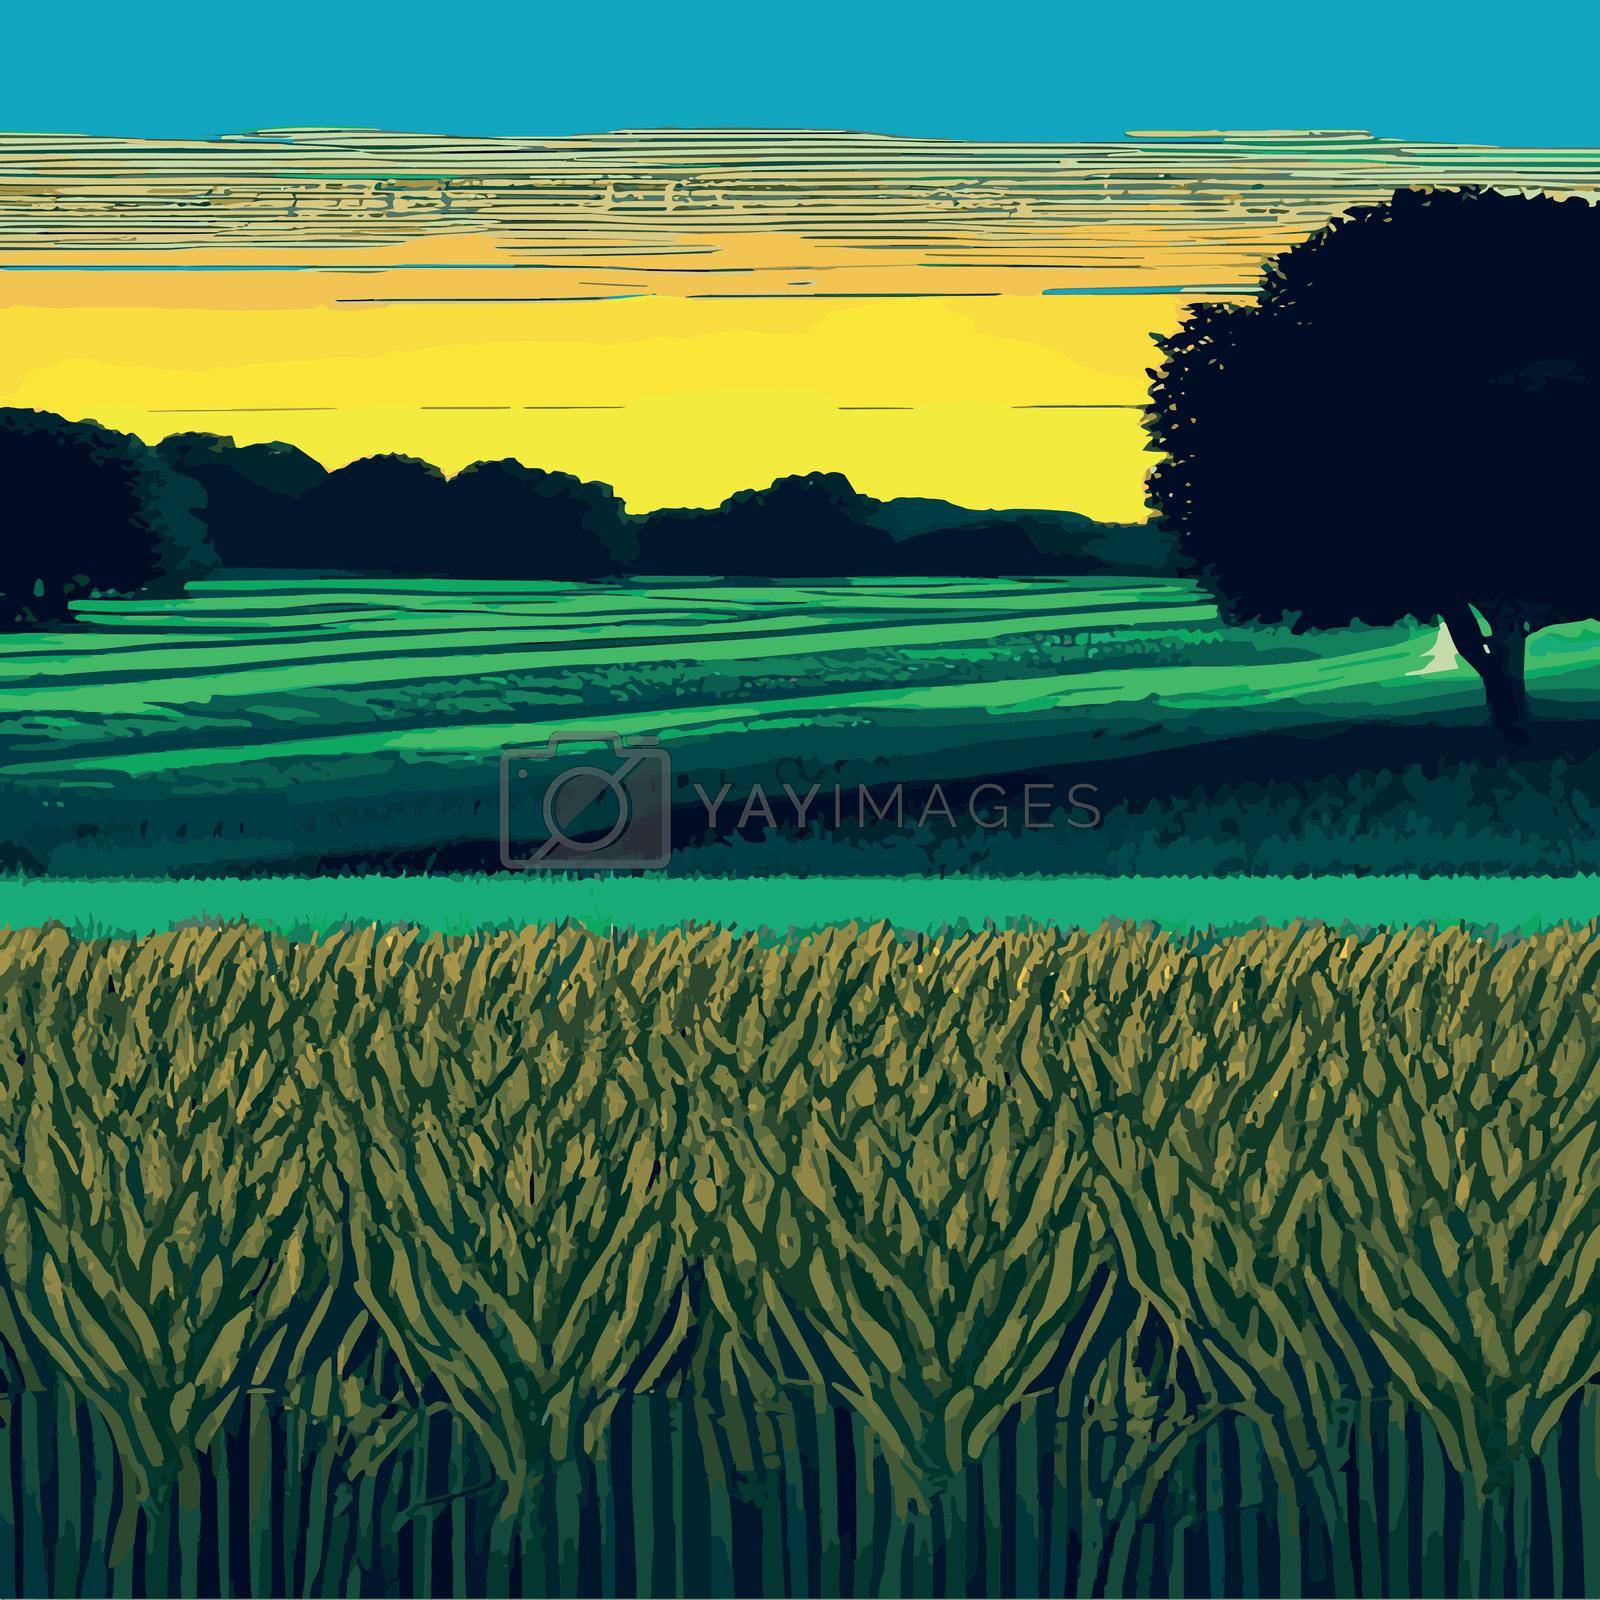 Vector wheat field. Flake ears. Rural landscape panorama. Hand drawn yellow watercolor illustration. Countryside engraving. ole wheat on the summer hills and distant in the background. trees, plants,